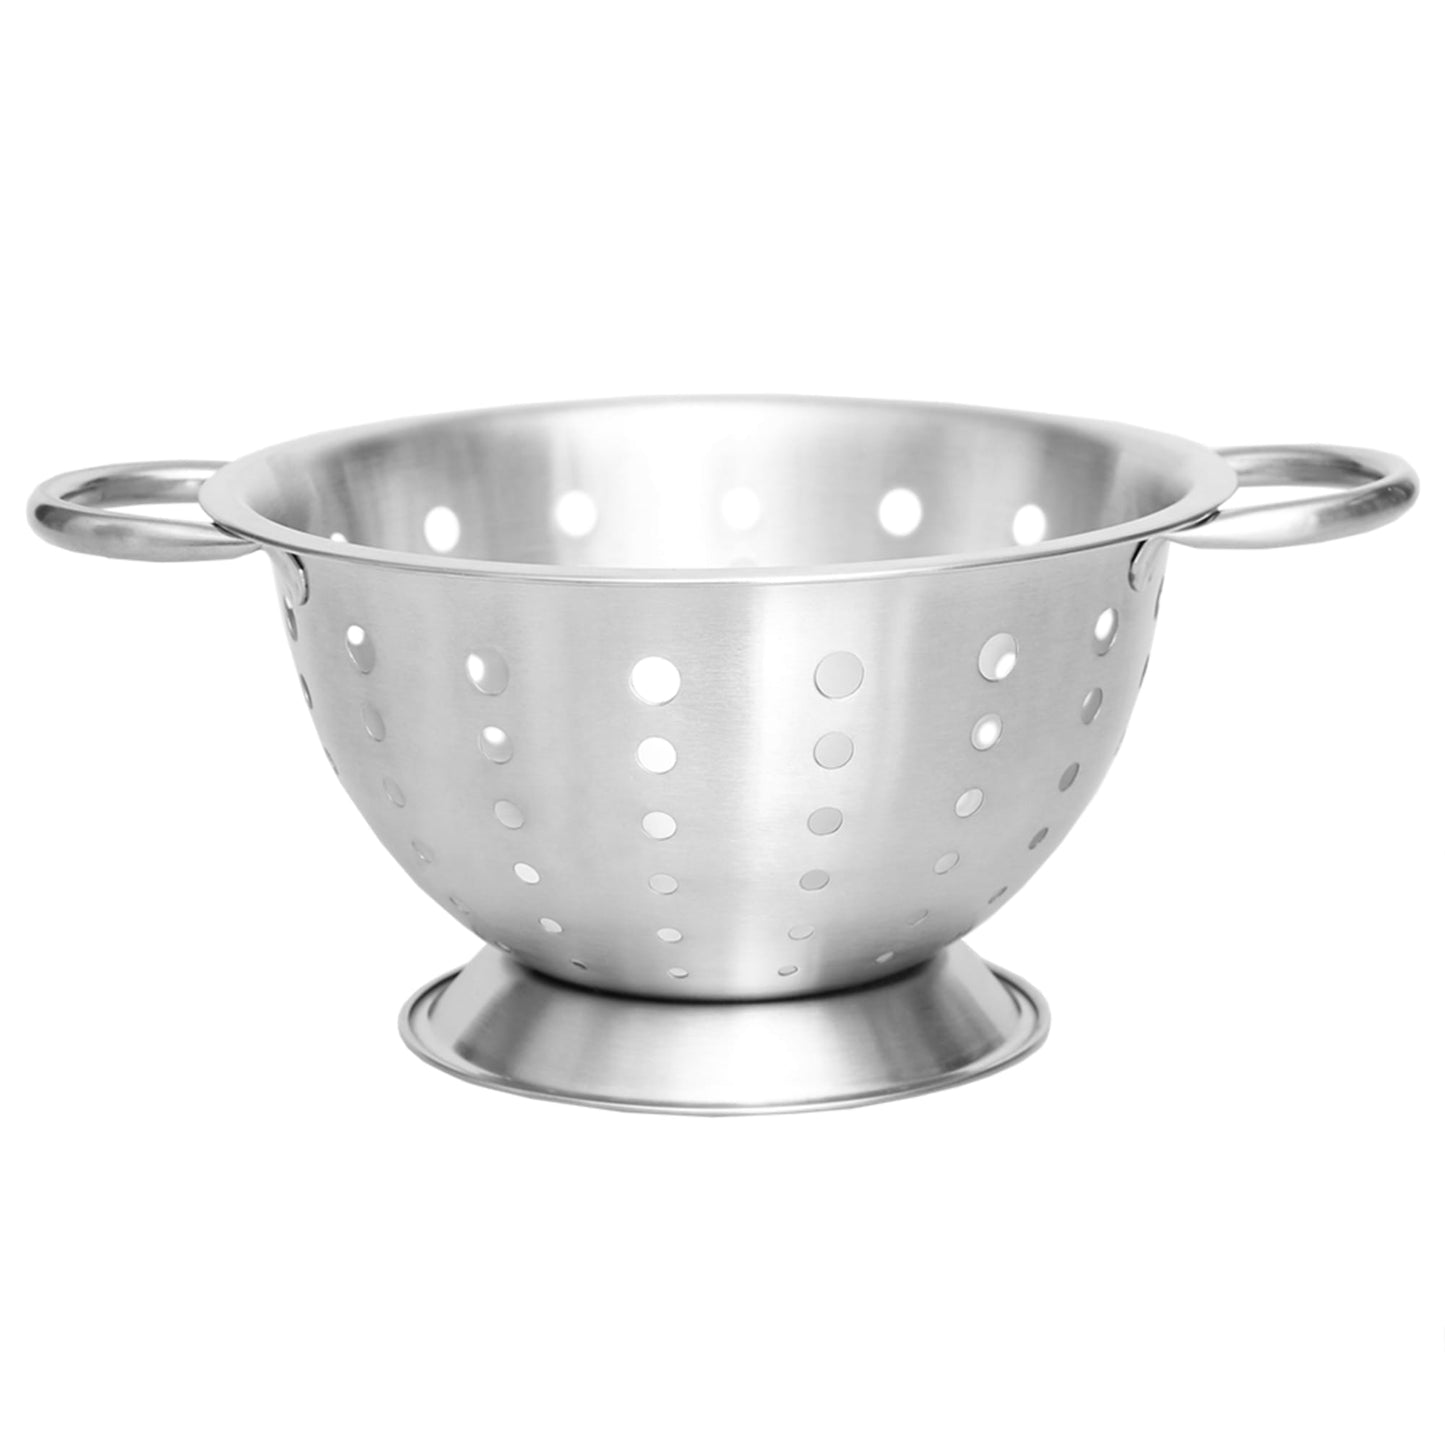 3 Qt Deep Stainless Steel Colander with Easy Grip Handles, Silver